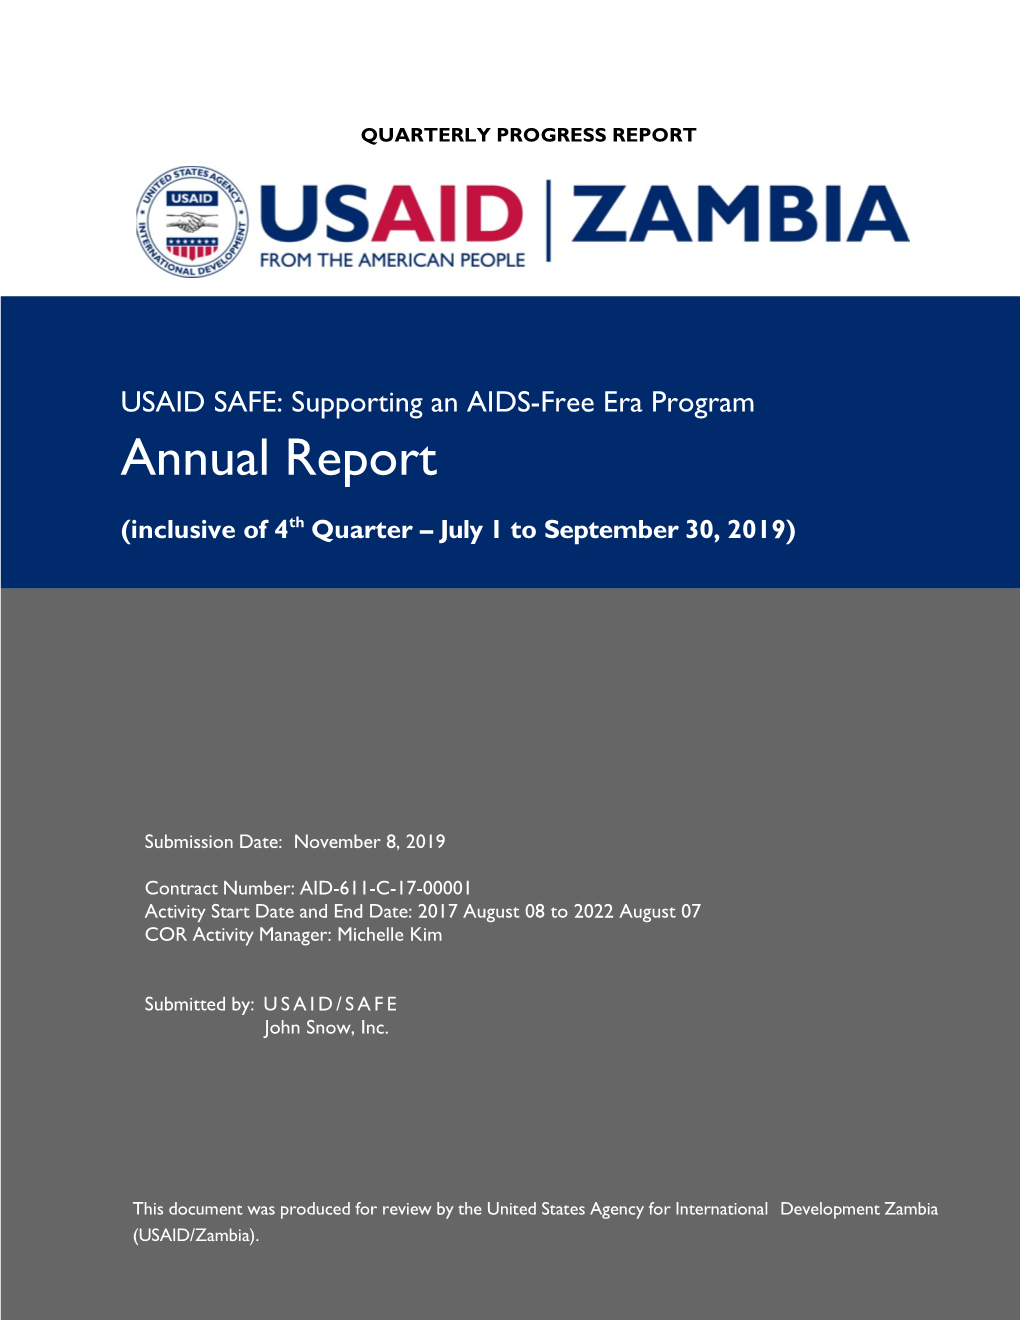 USAID SAFE: Supporting an AIDS-Free Era Program Annual Report